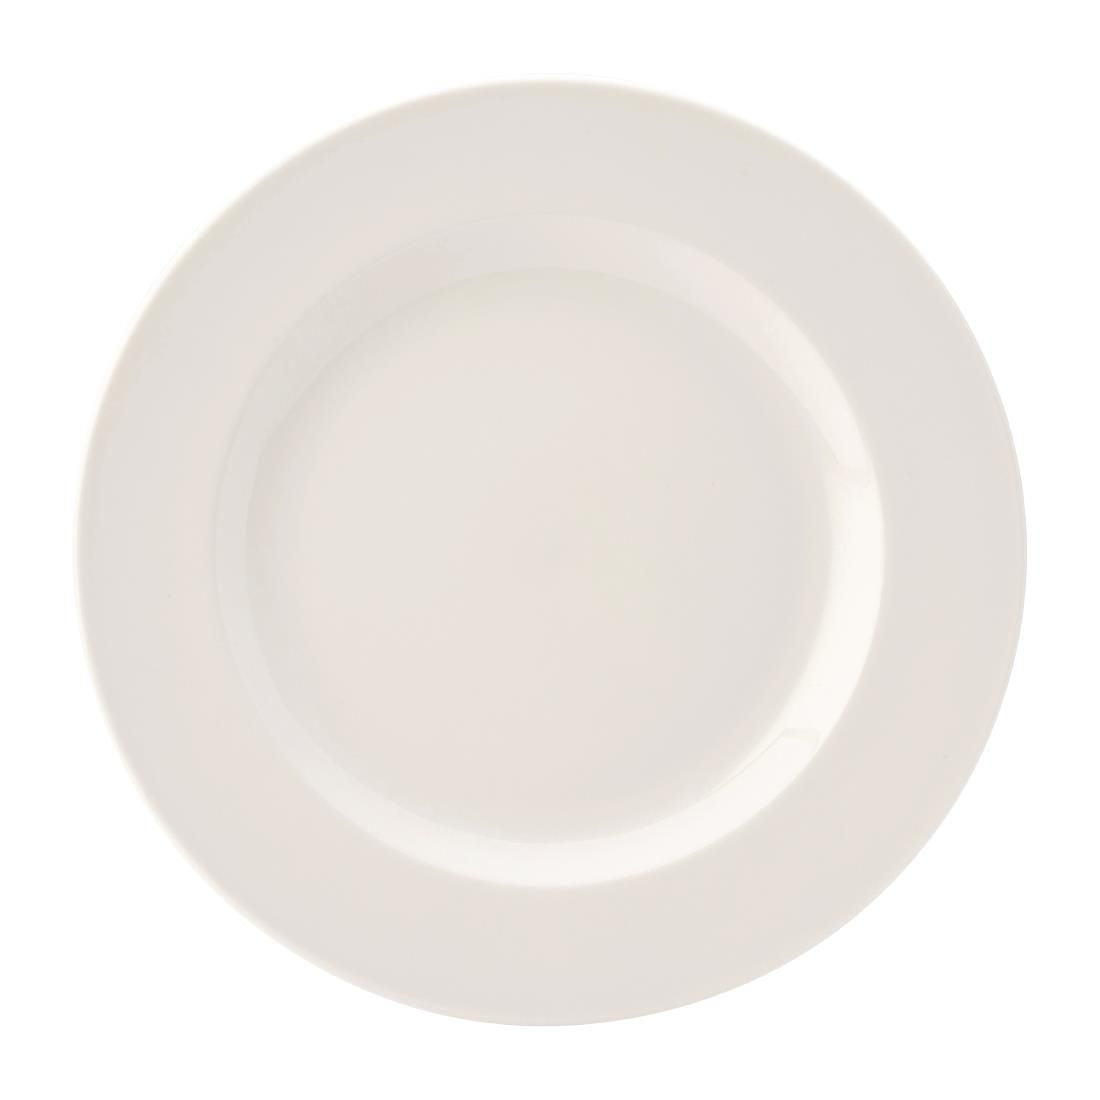 DY313 Utopia Pure White Wide Rim Plates 250mm (Pack of 24)